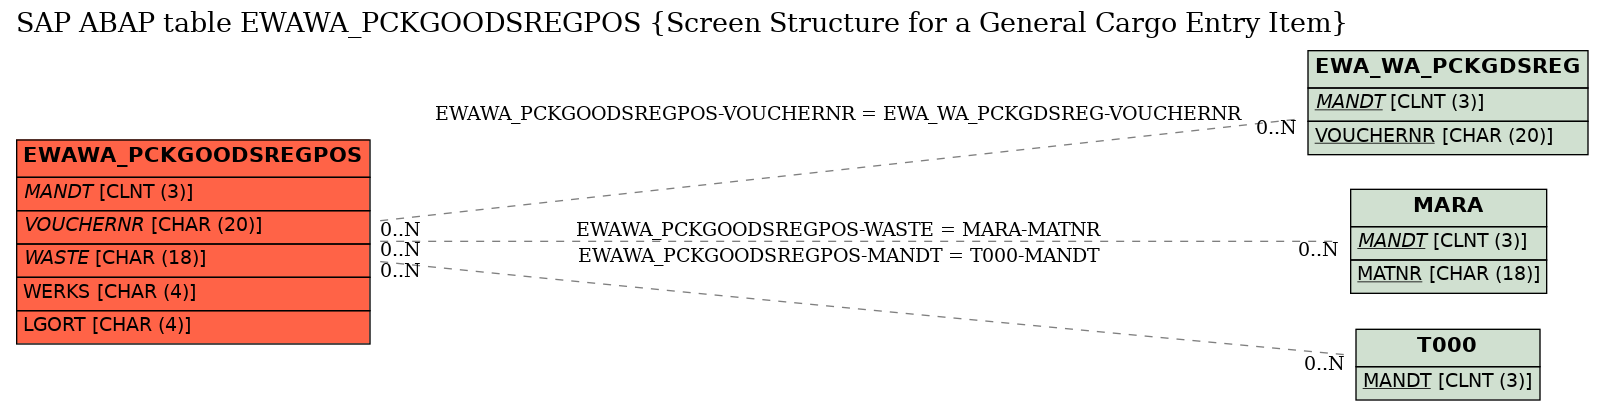 E-R Diagram for table EWAWA_PCKGOODSREGPOS (Screen Structure for a General Cargo Entry Item)